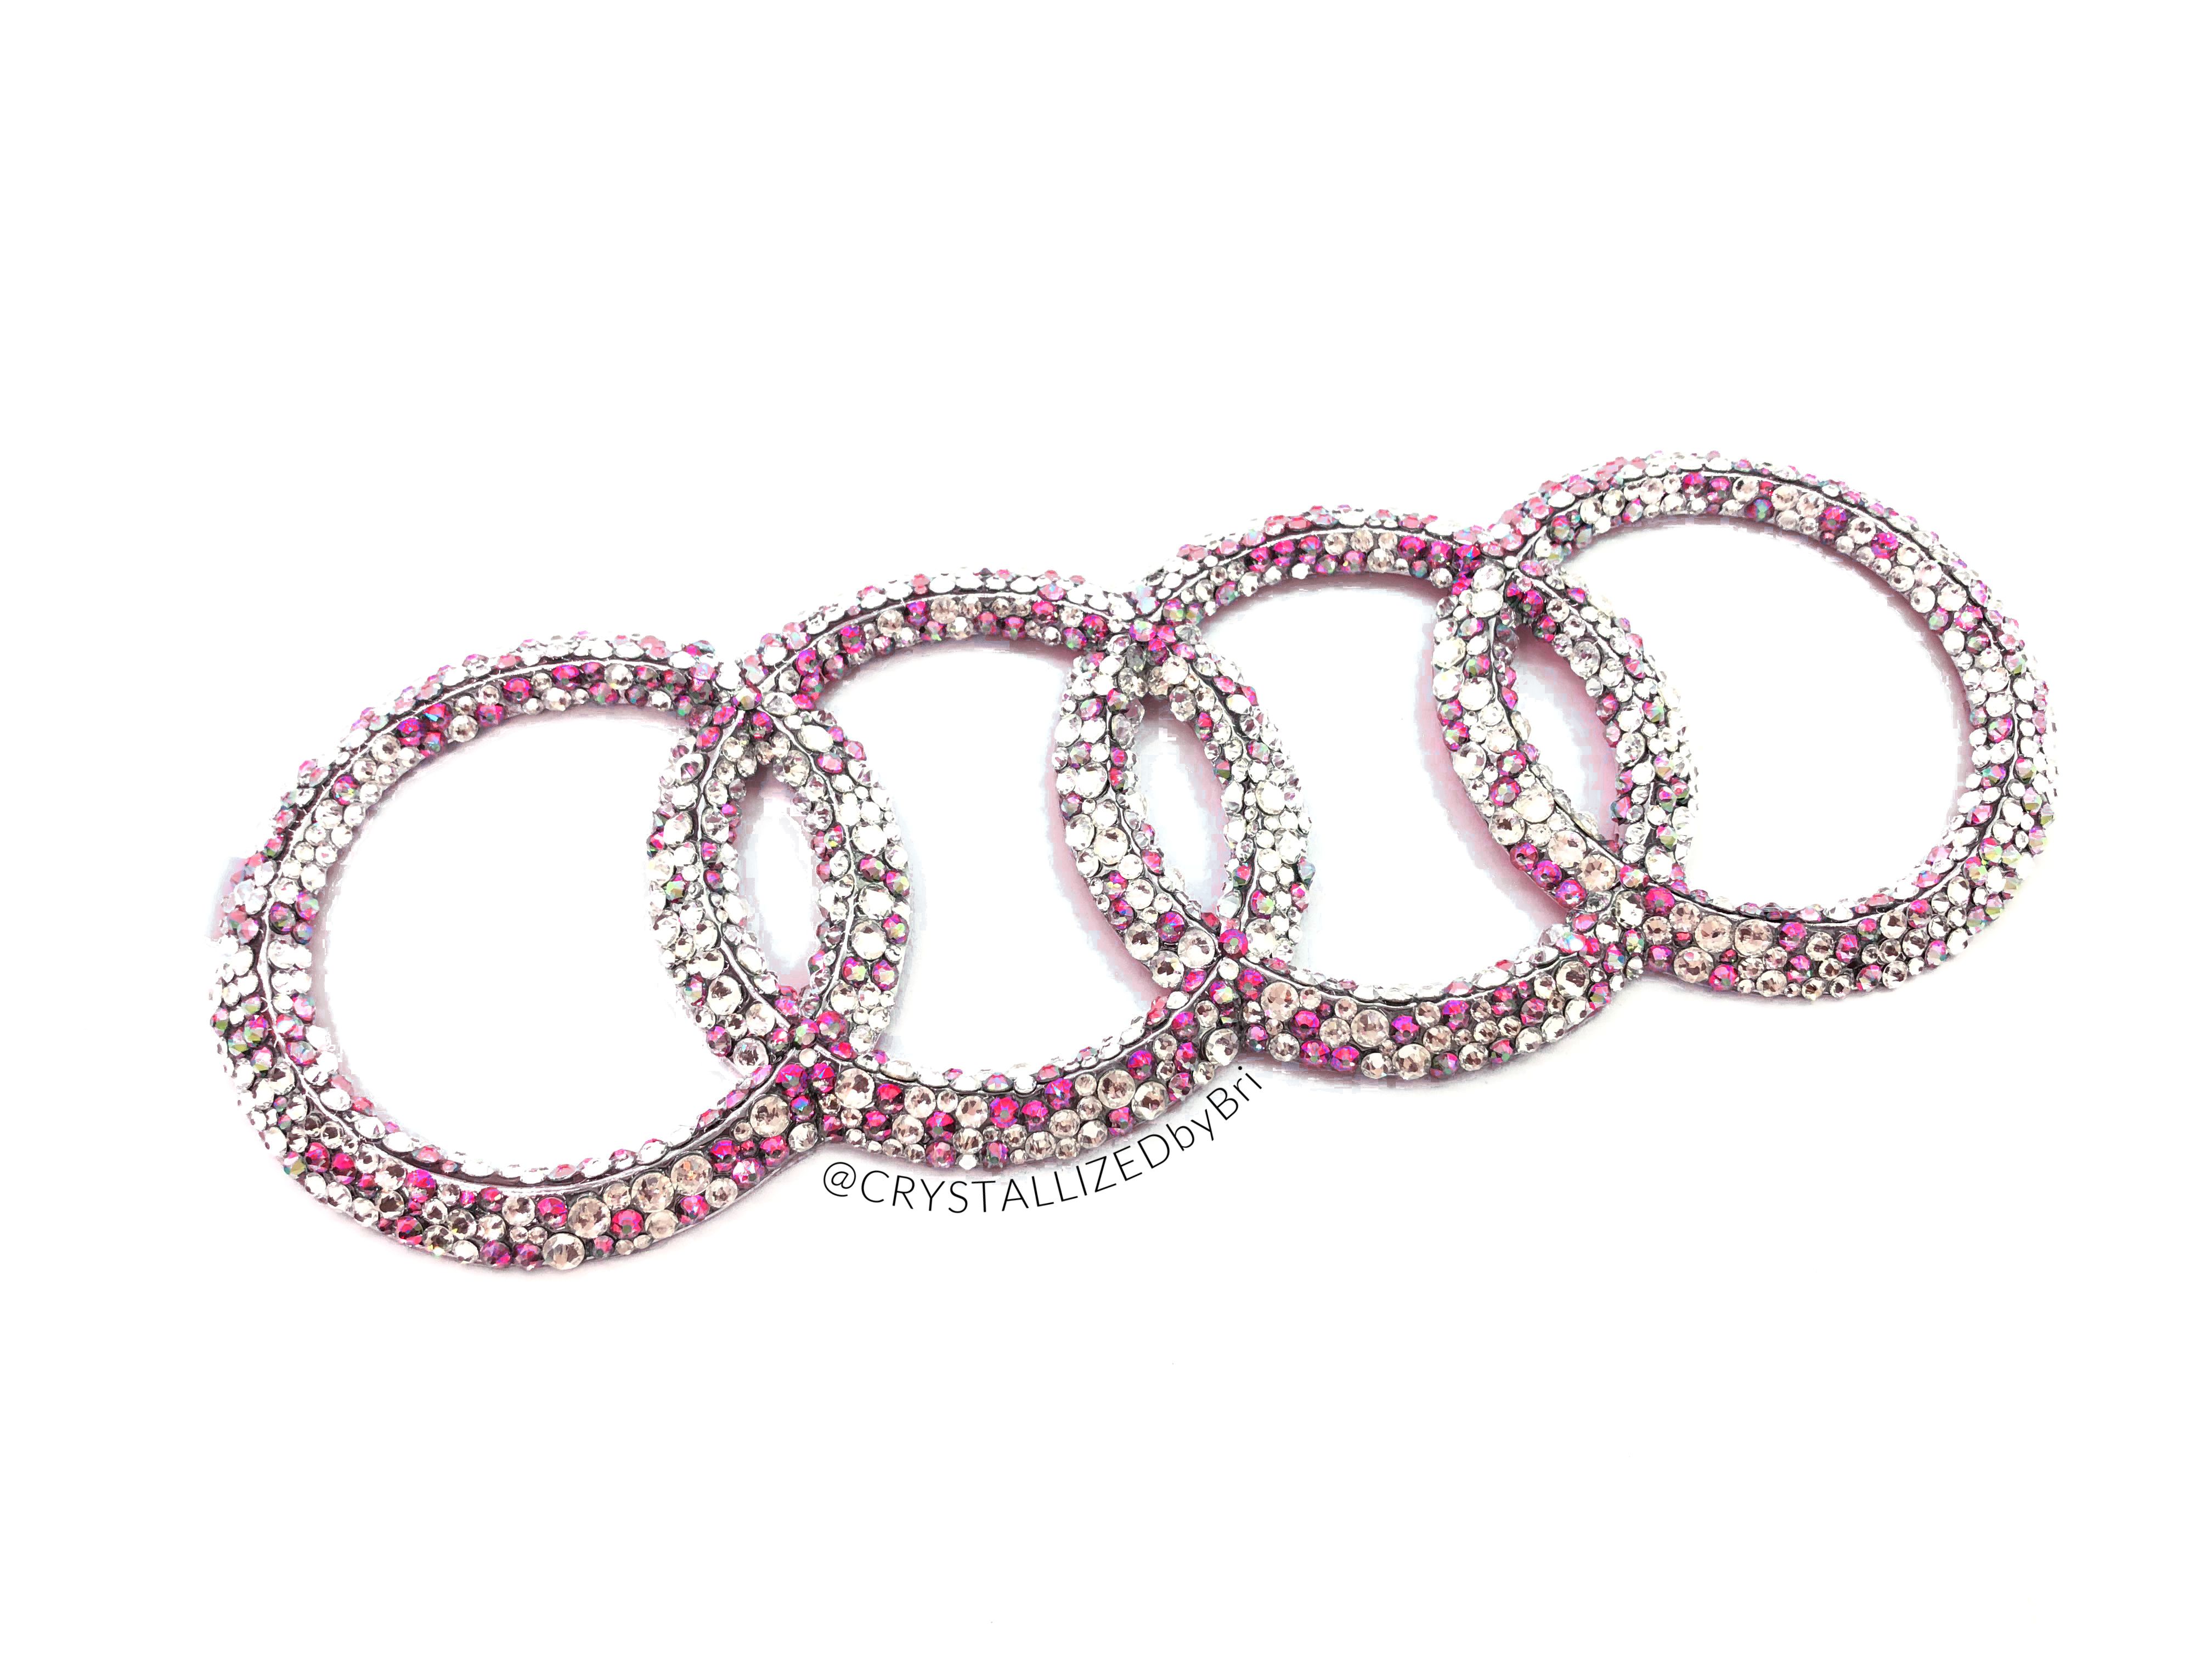 Buy Hand Crafted Pink Audi Car Emblem Genuine European Crystals  Crystallized Bling Bedazzled Rings Badge, made to order from CRYSTALL!ZED  by Bri, LLC